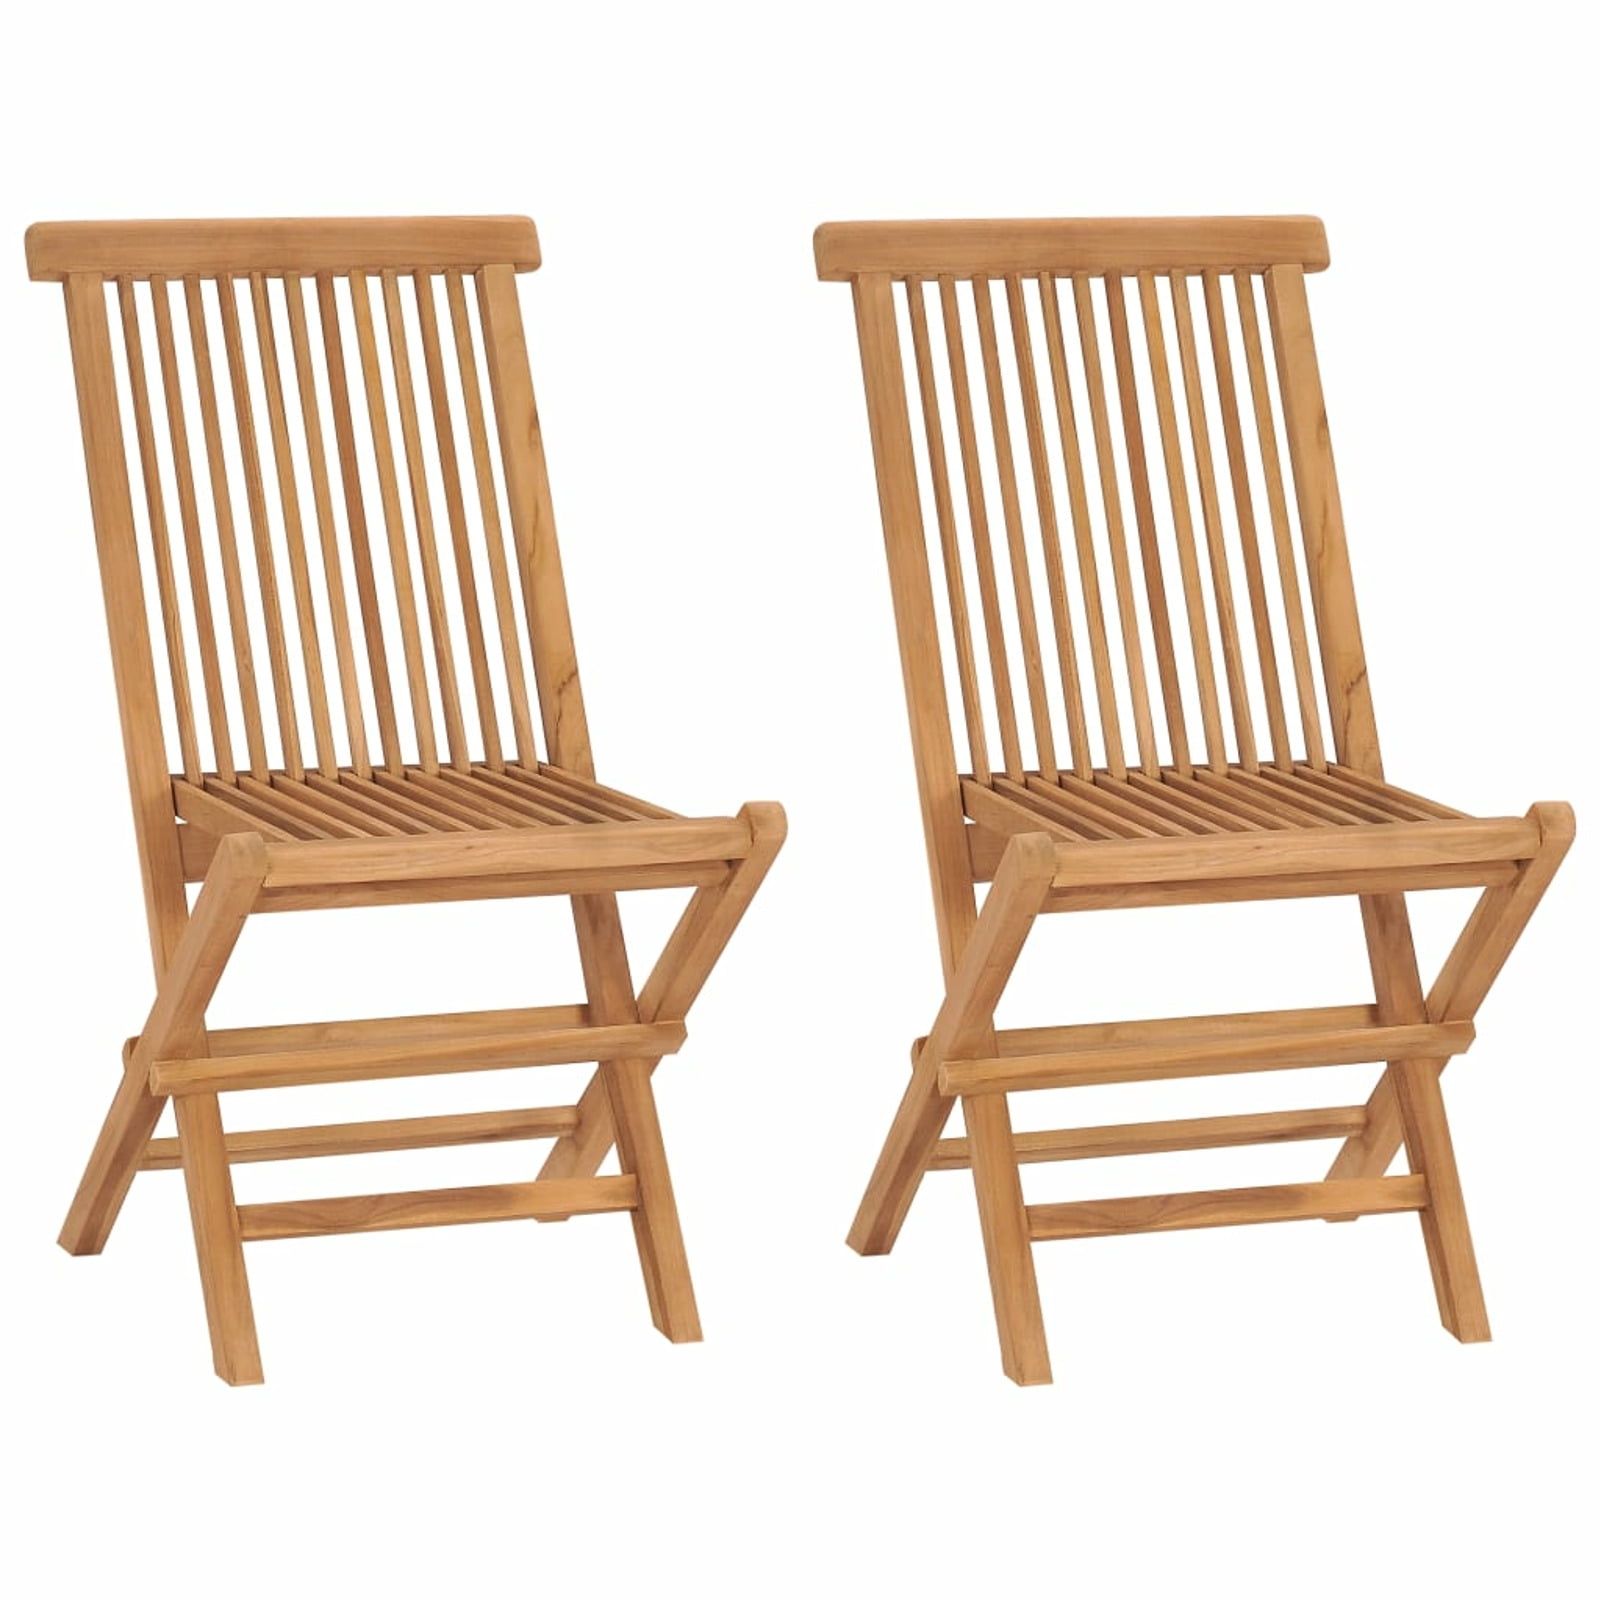 Details about   OUTDOOR FOLDING PATIO CHAIRS SET Of 2 Steel Sling Wicker Seat Blue Black Beige 